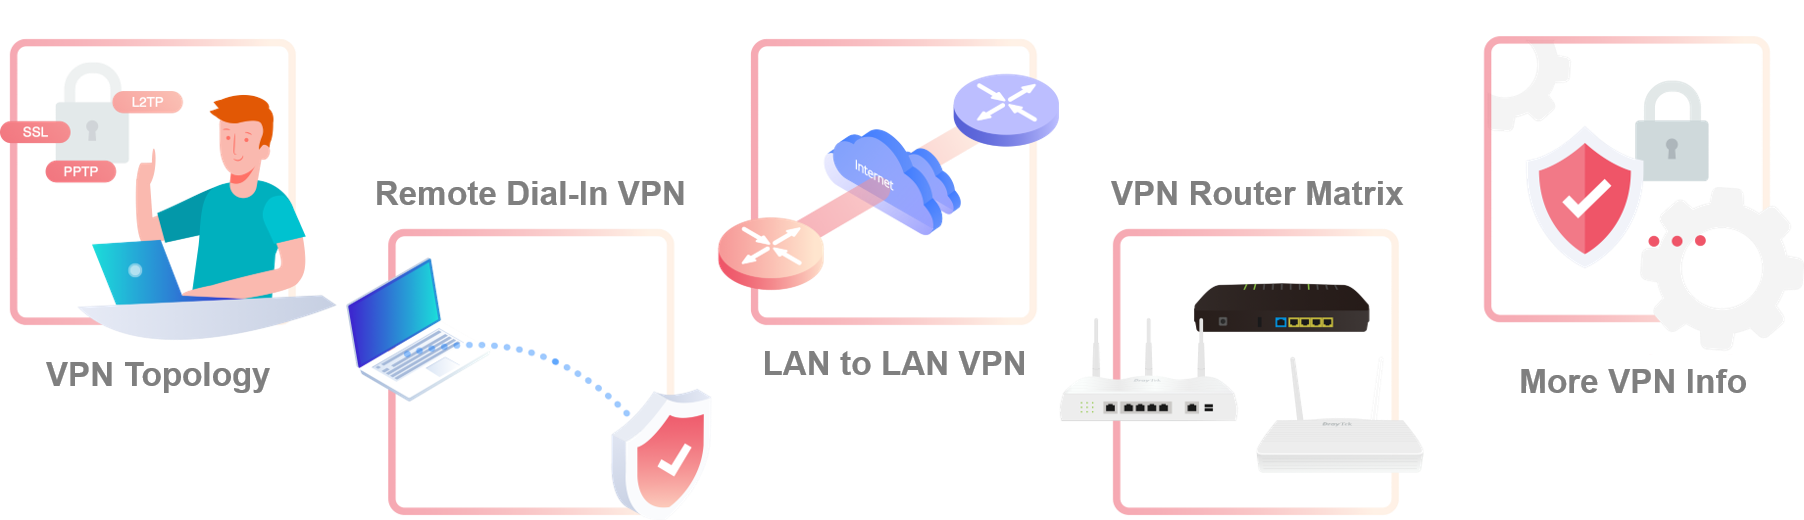 Work from Home VPN Solution in 5 steps